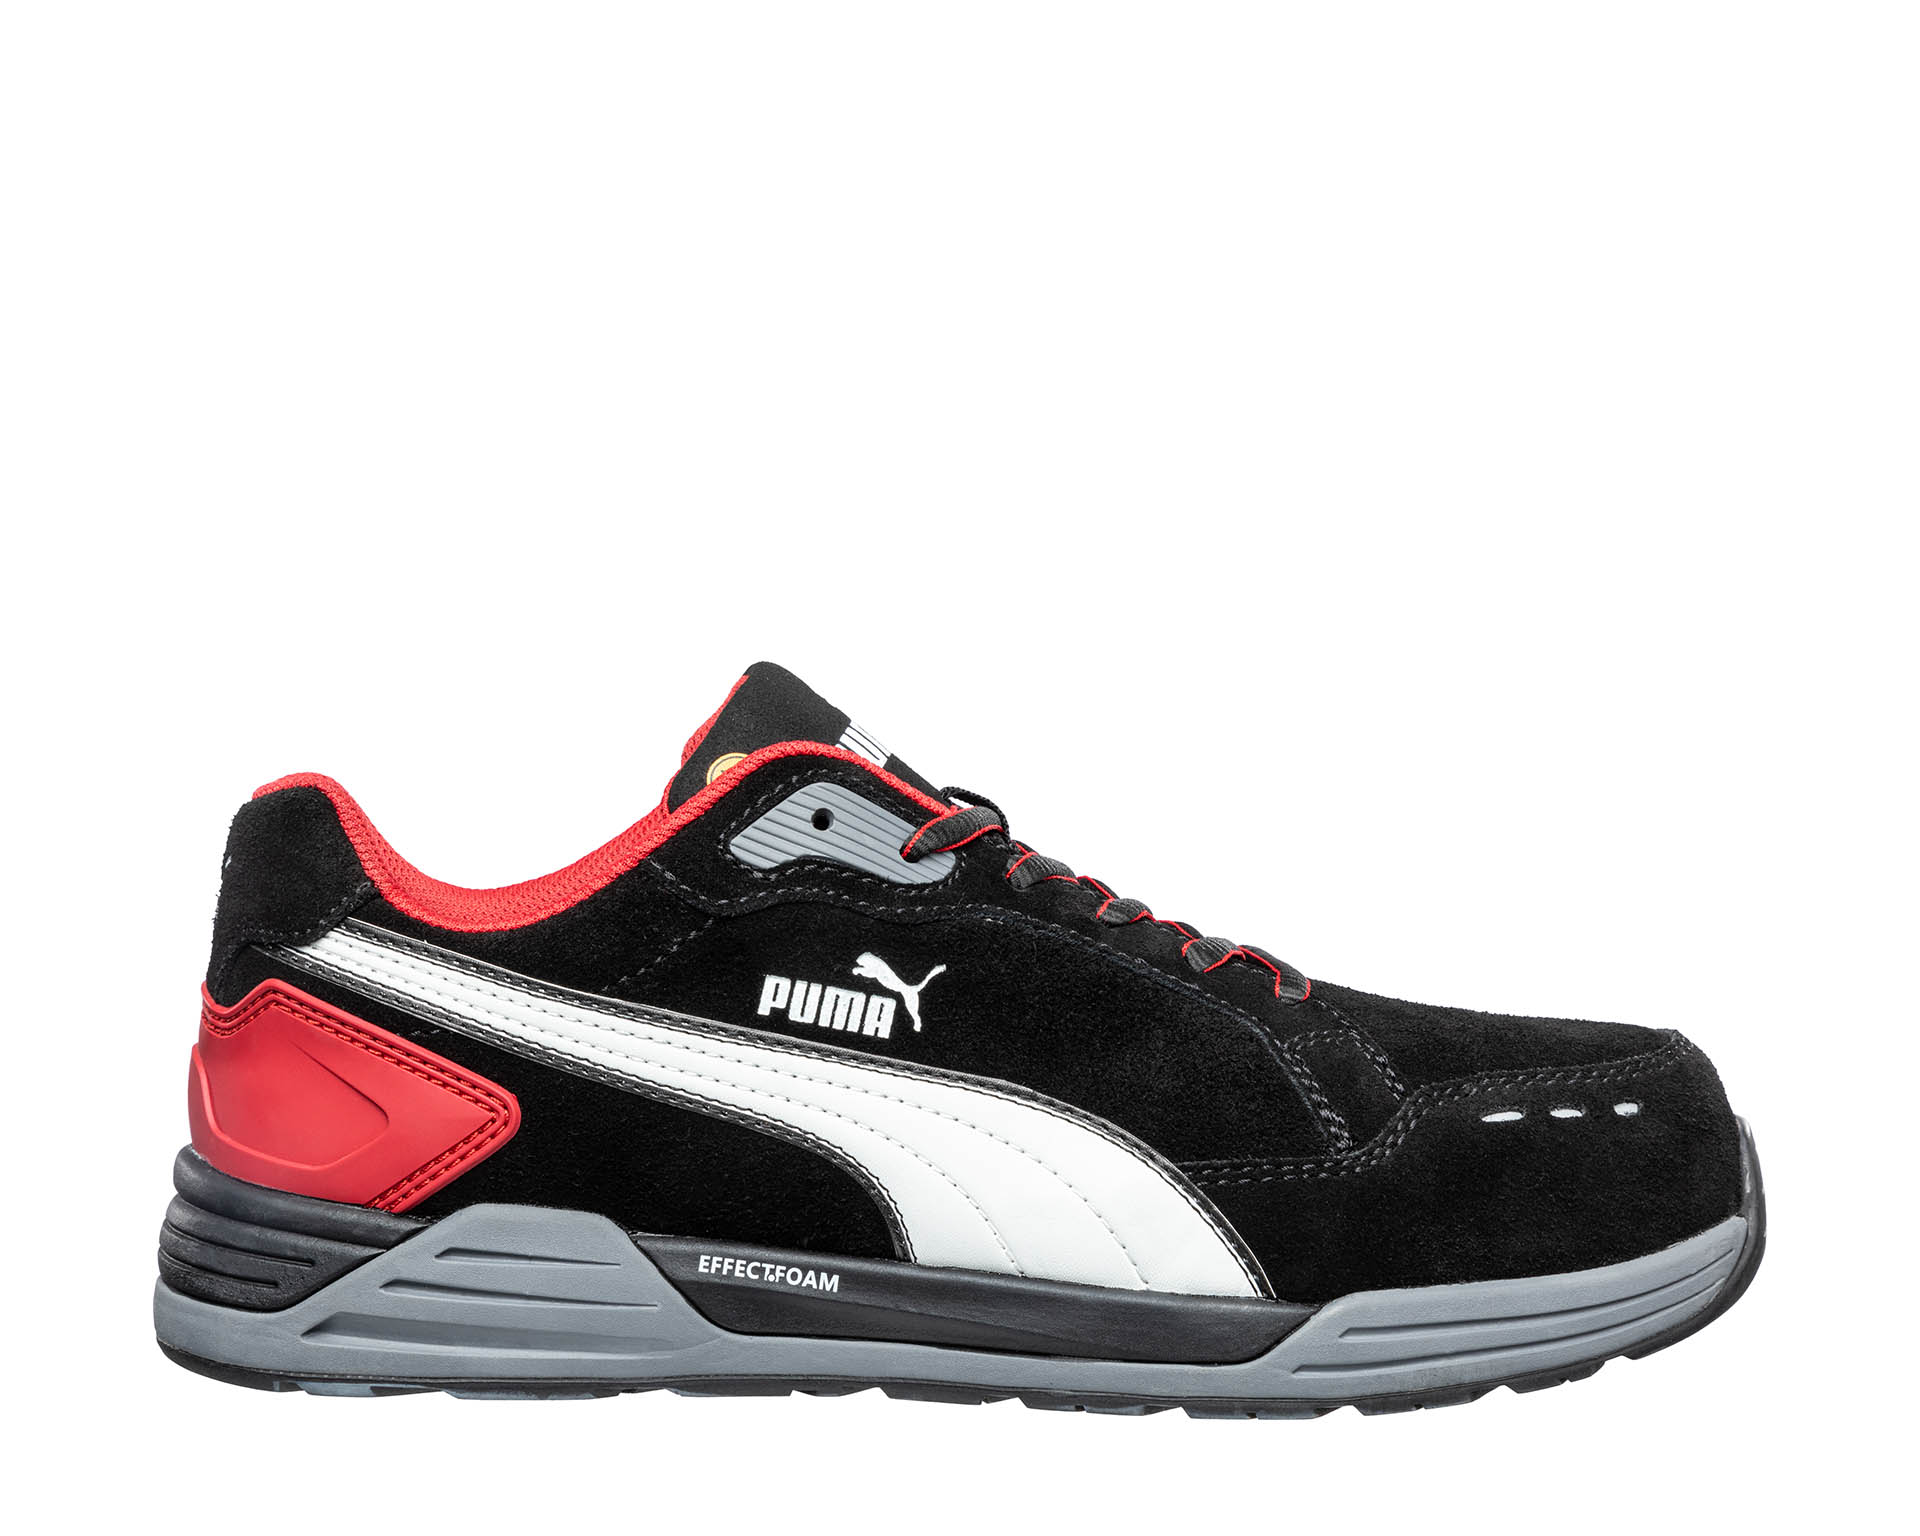 PUMA SAFETY safety Puma BLK/RED AIRTWIST Safety LOW ESD English S3 | HRO shoes SRC